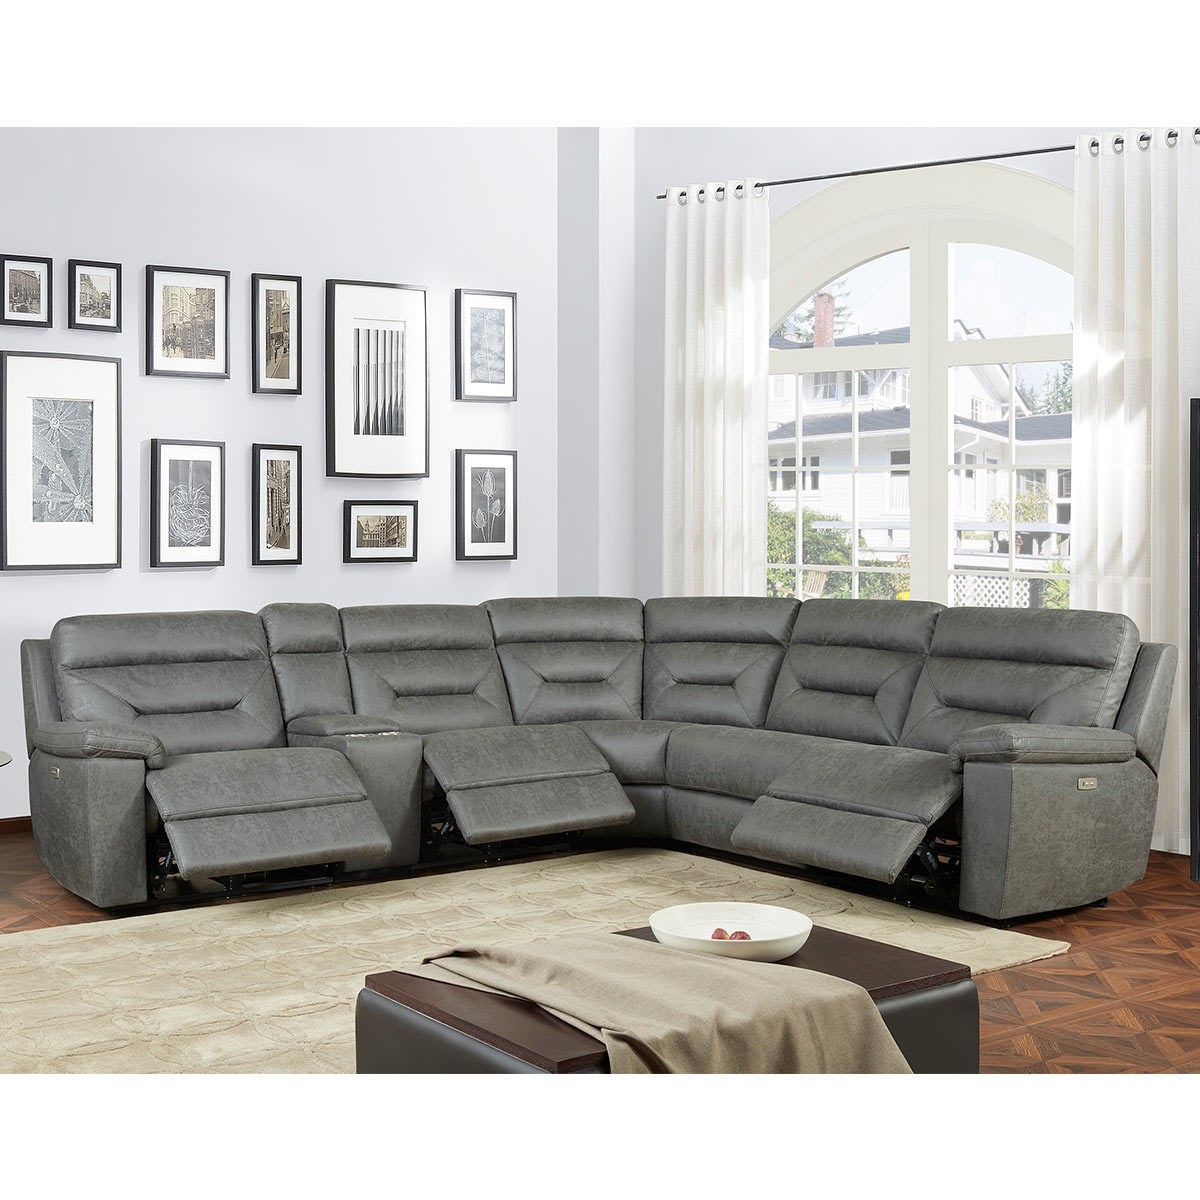 Gilman Creek Justin Grey Fabric Power, Grey Fabric Sectional Sofa With Recliner And Chaise Lounge Chair